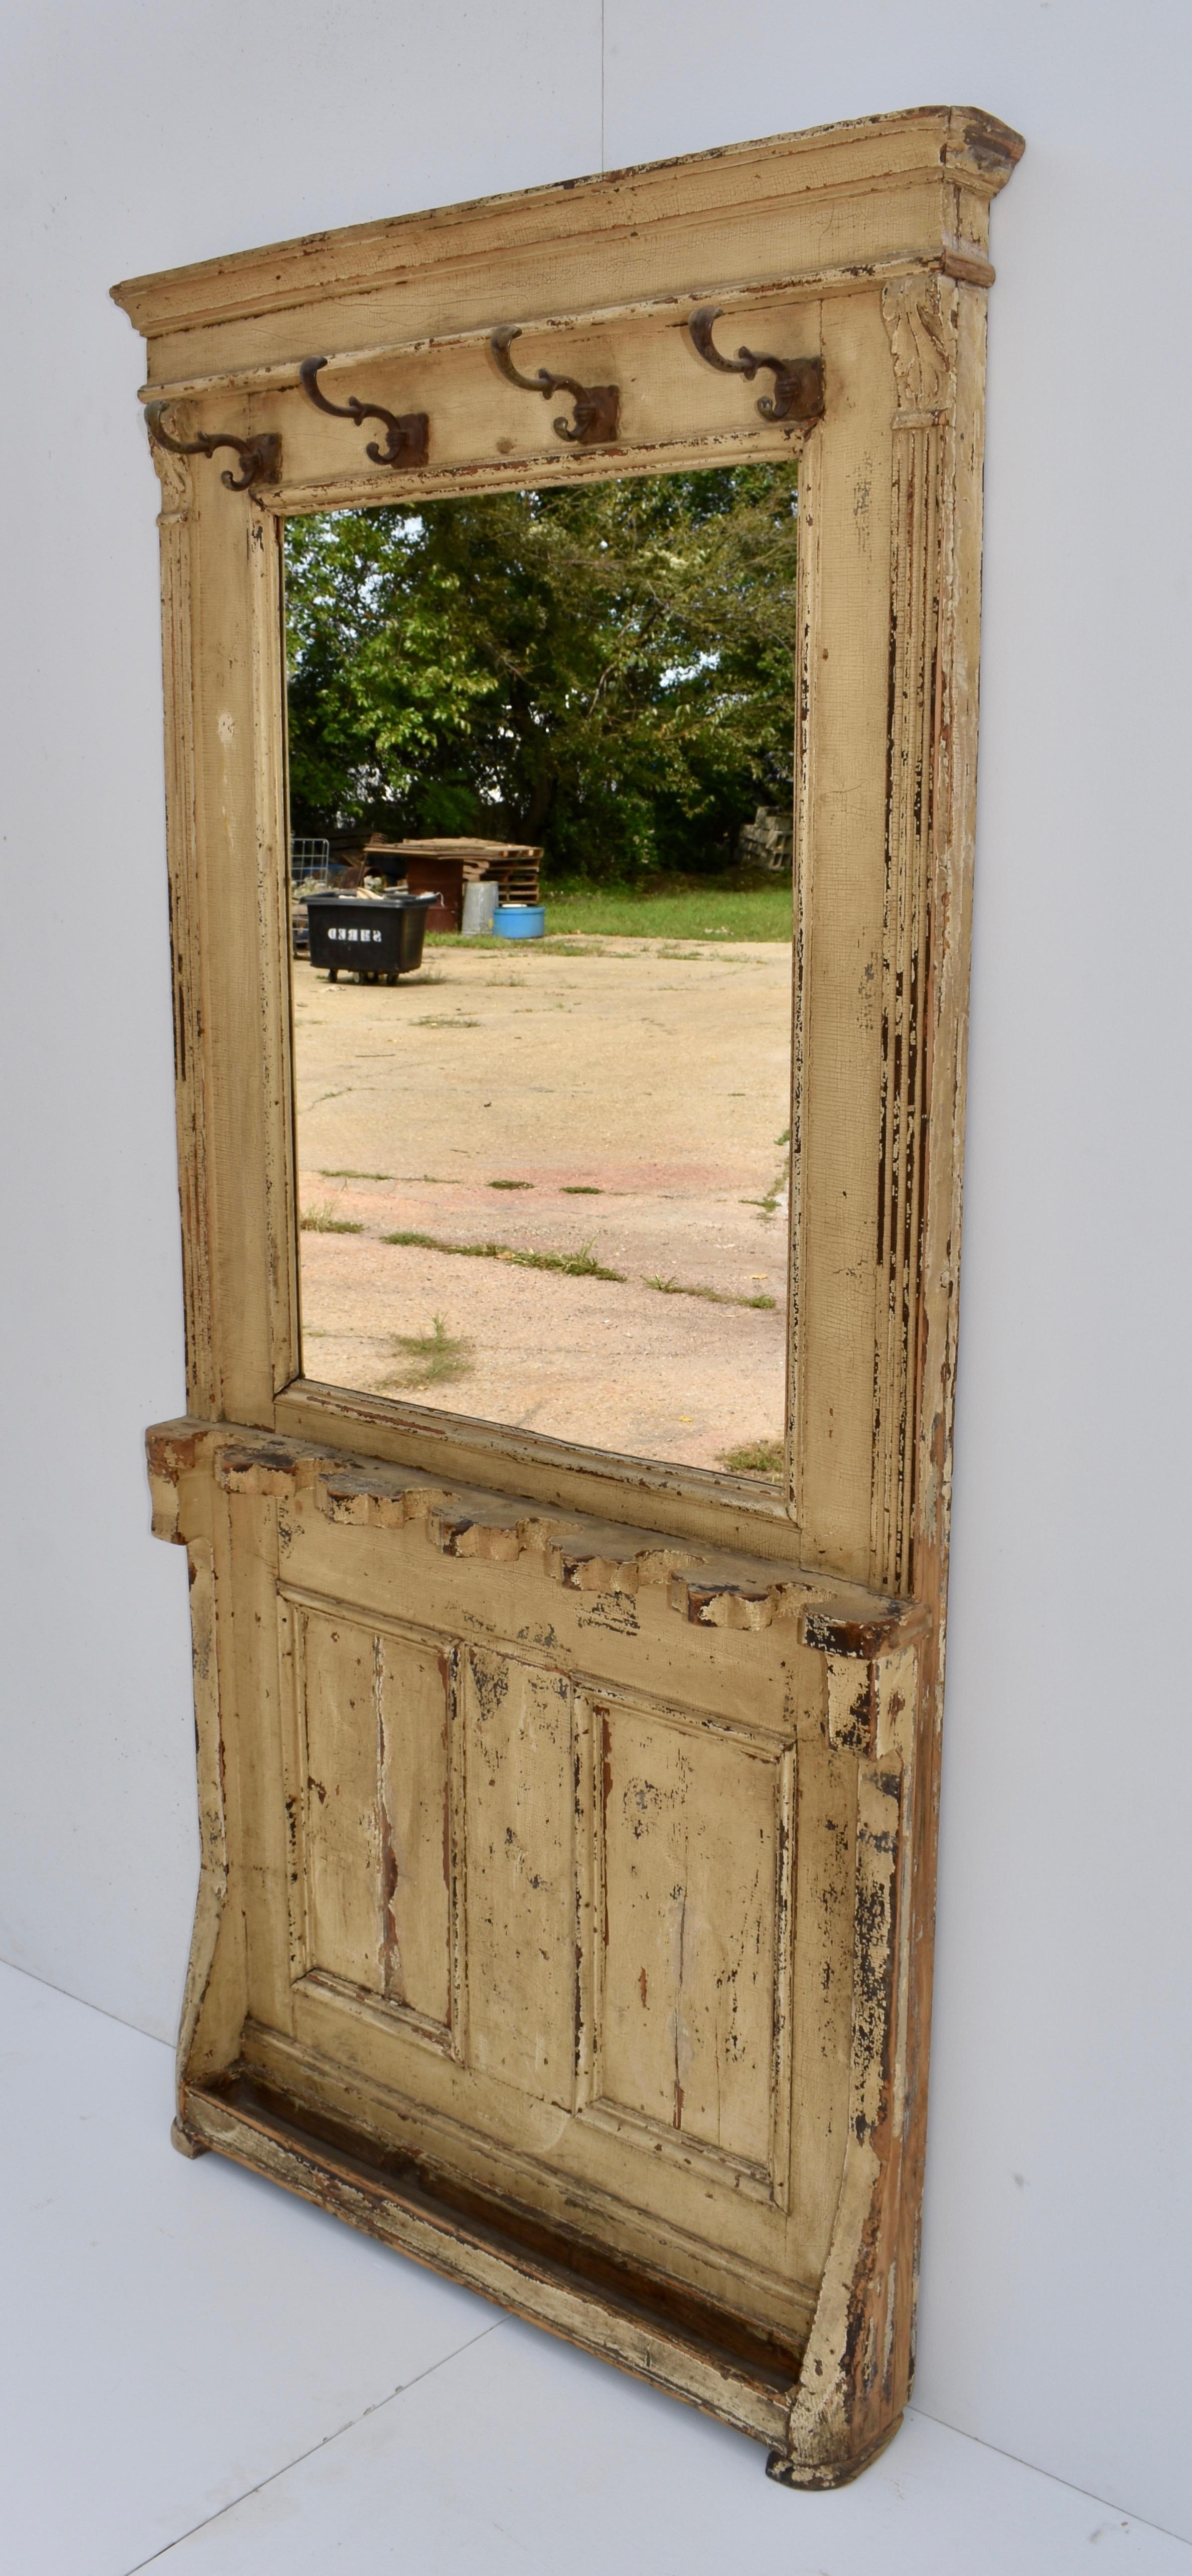 This wonderfully shabby pine hallstand has four original coat hooks above a large mirror and two flat panels behind six wooden holders and a drip tray (zinc liner sadly missing) for storing walking sticks or umbrellas. The front corners are